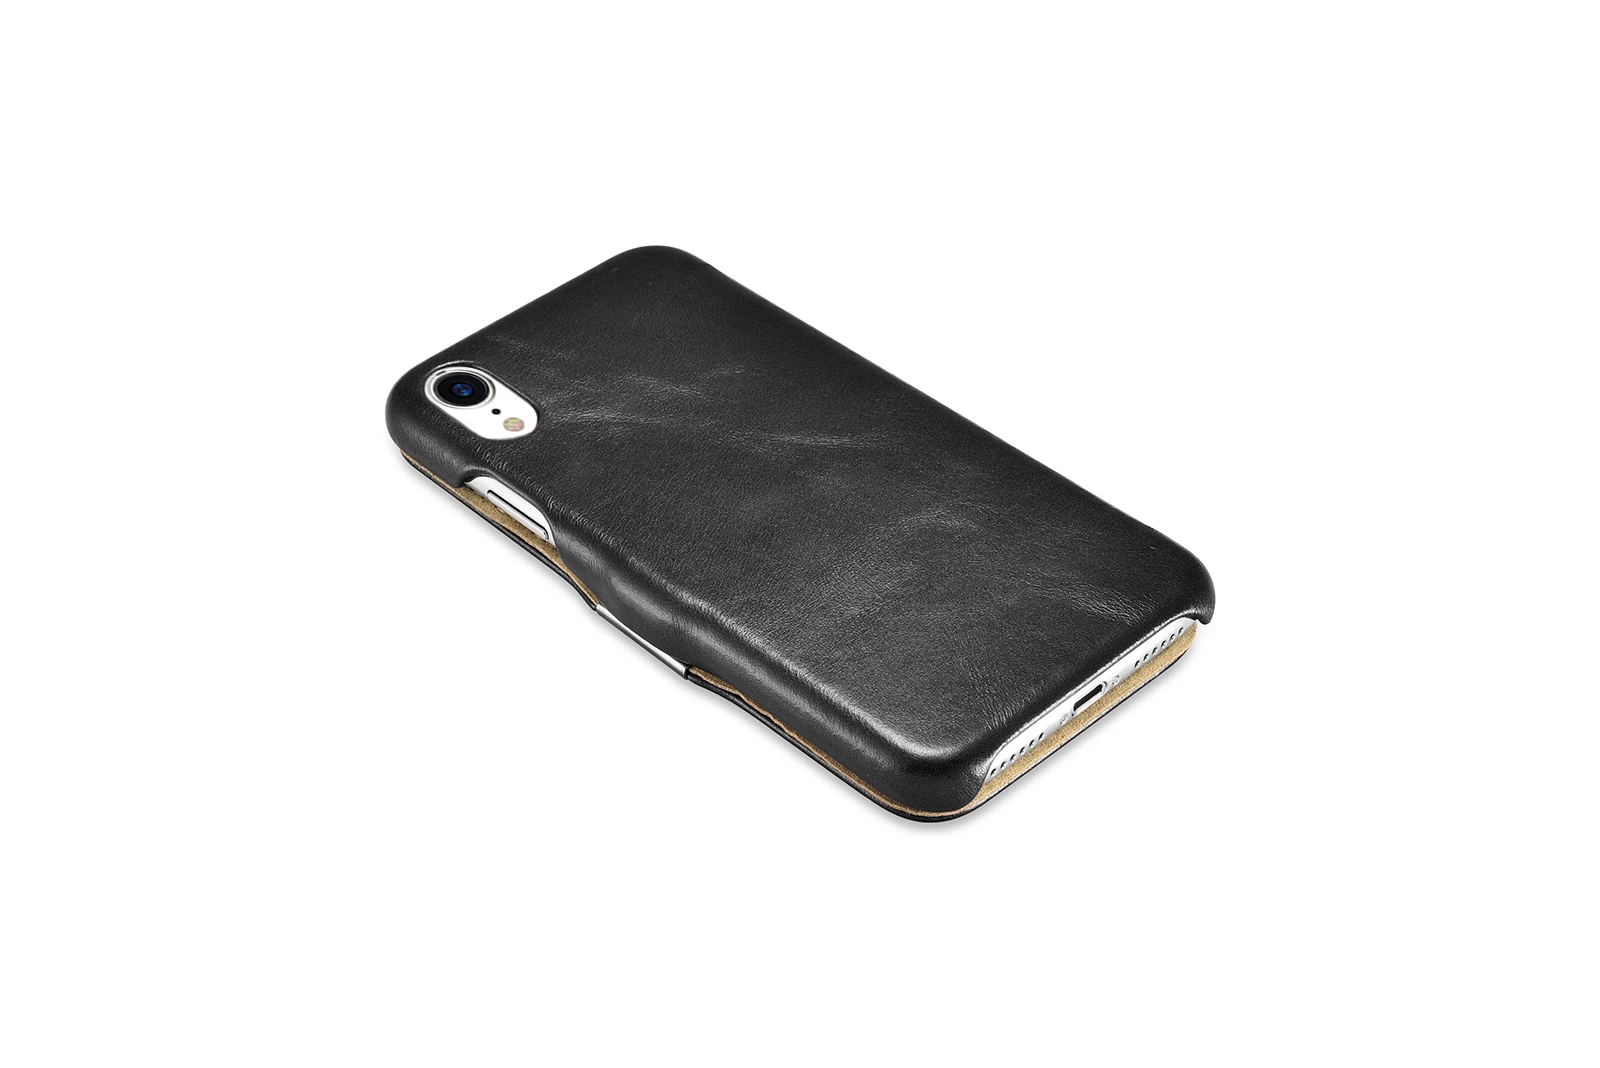 Luxury Ultrathin Flip Retro Genuine Leather Cover for iPhone X XR XS Max Protection Business Shell Case for iPhone X XR XS Max iphone 7 phone cases